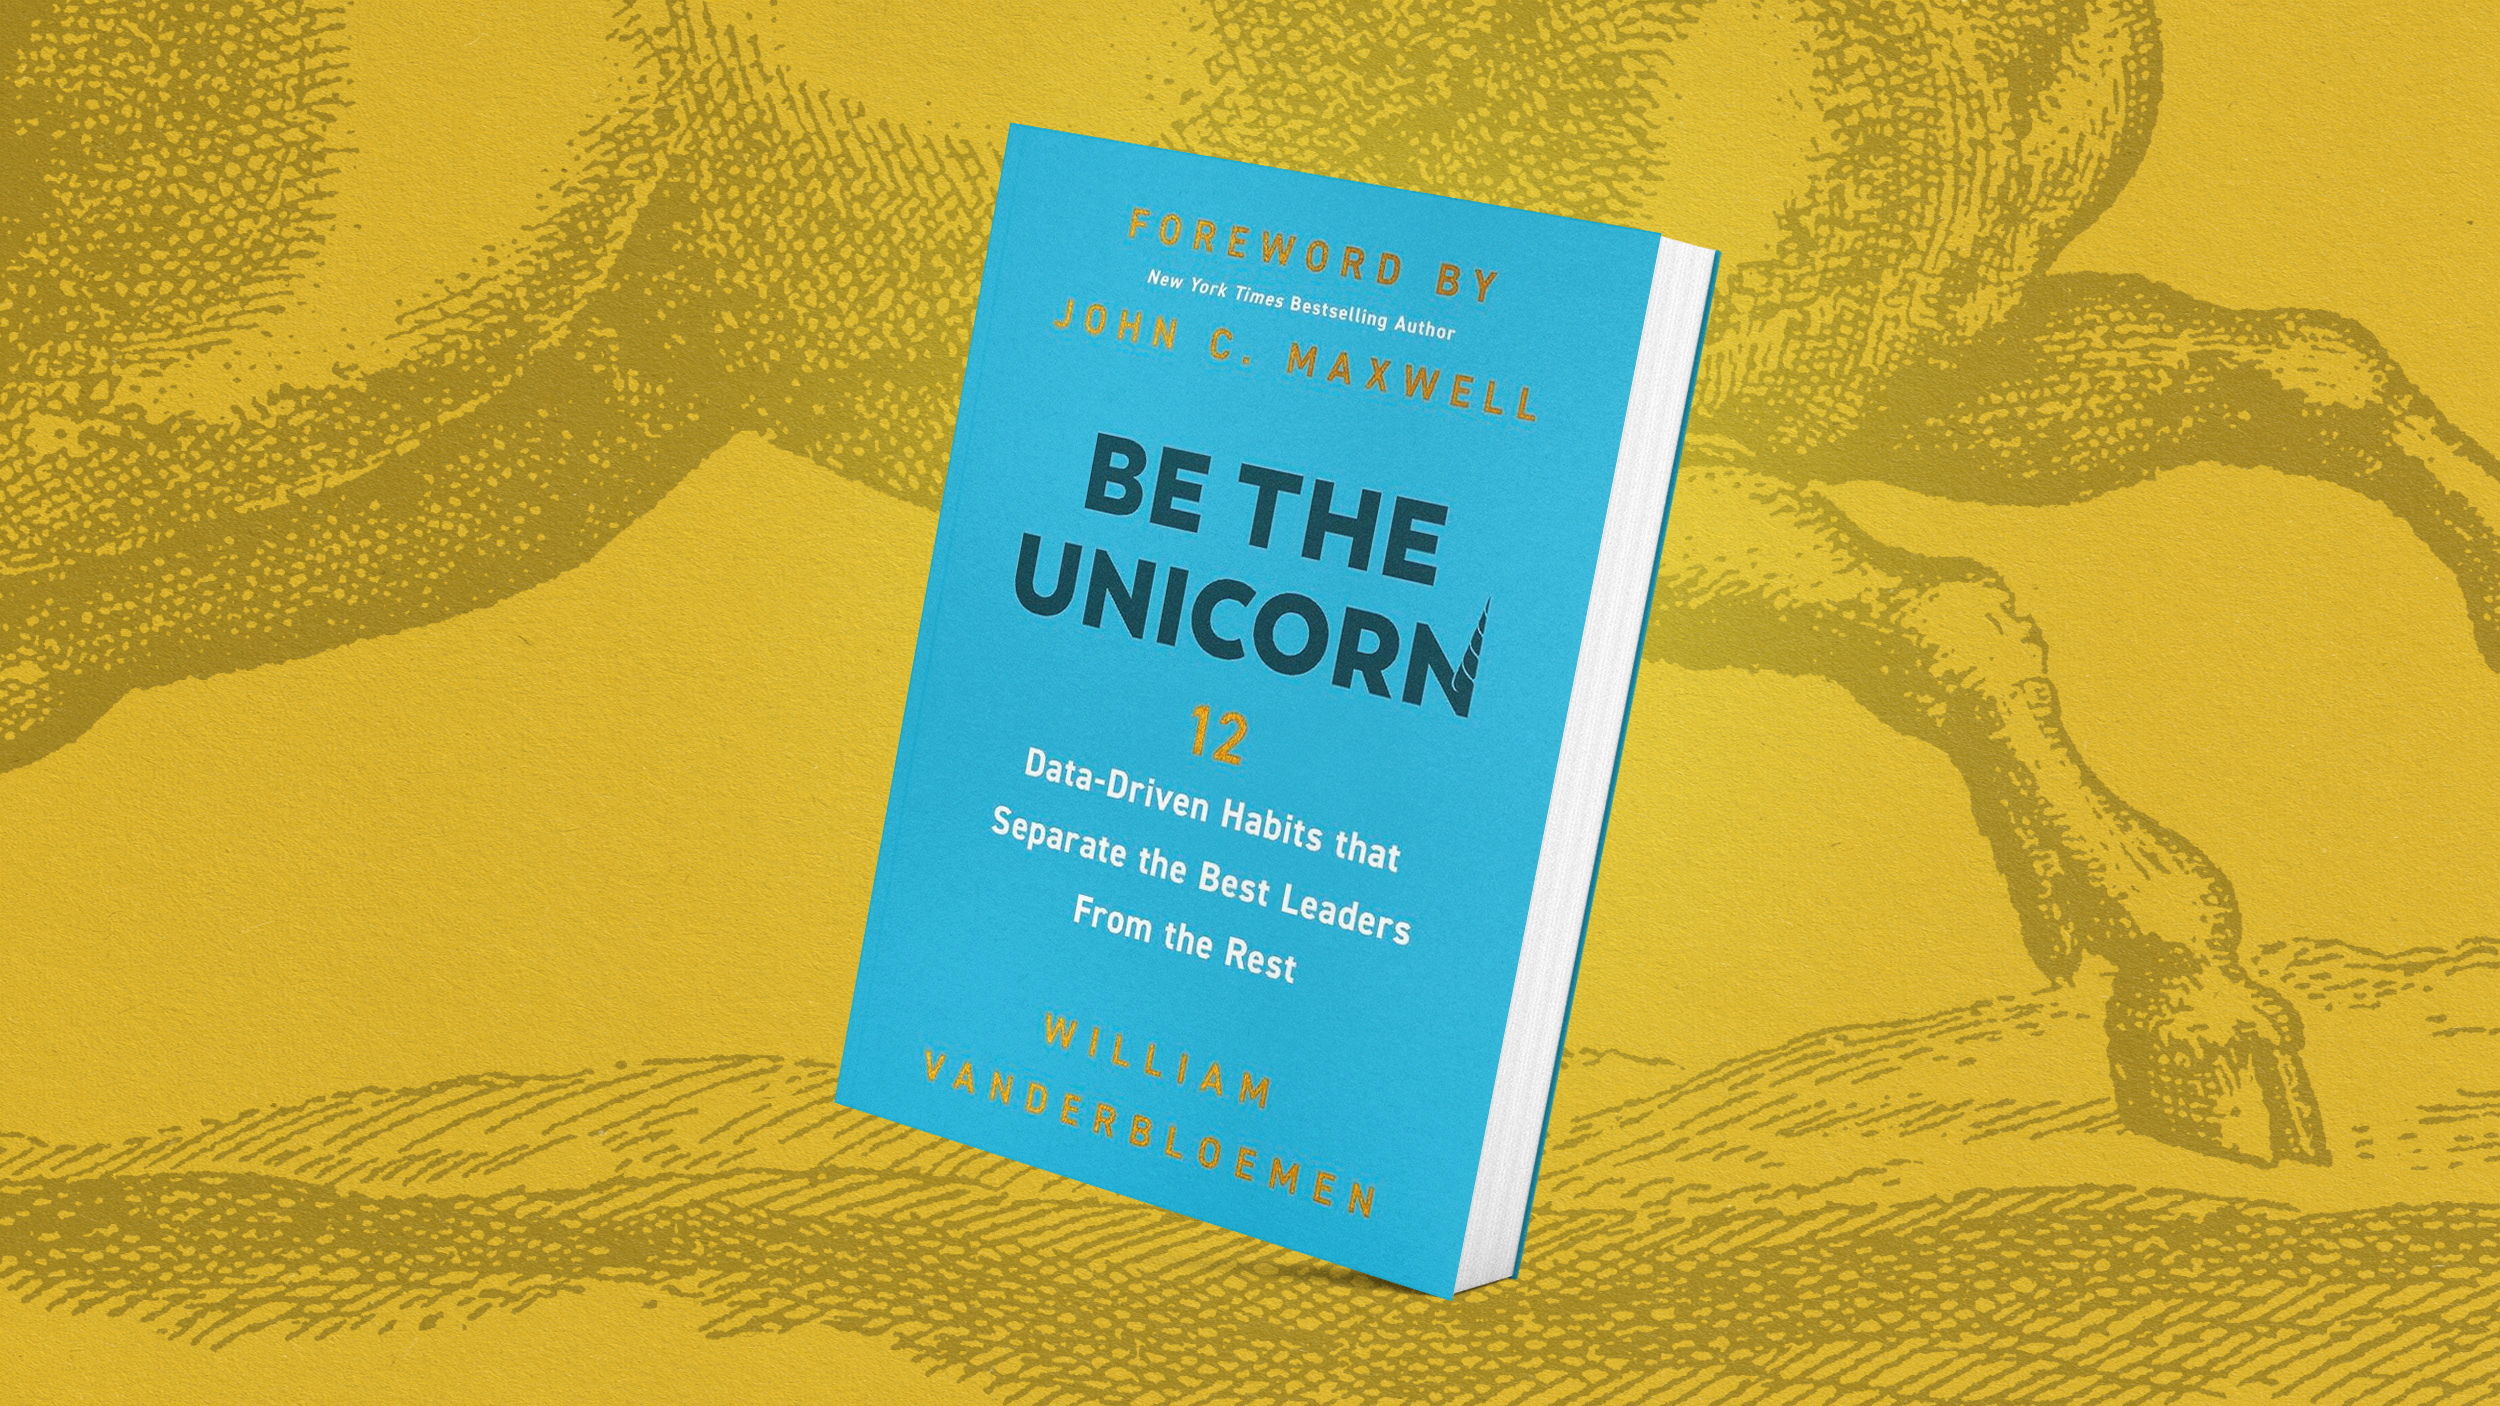 The curious be the unicorn.